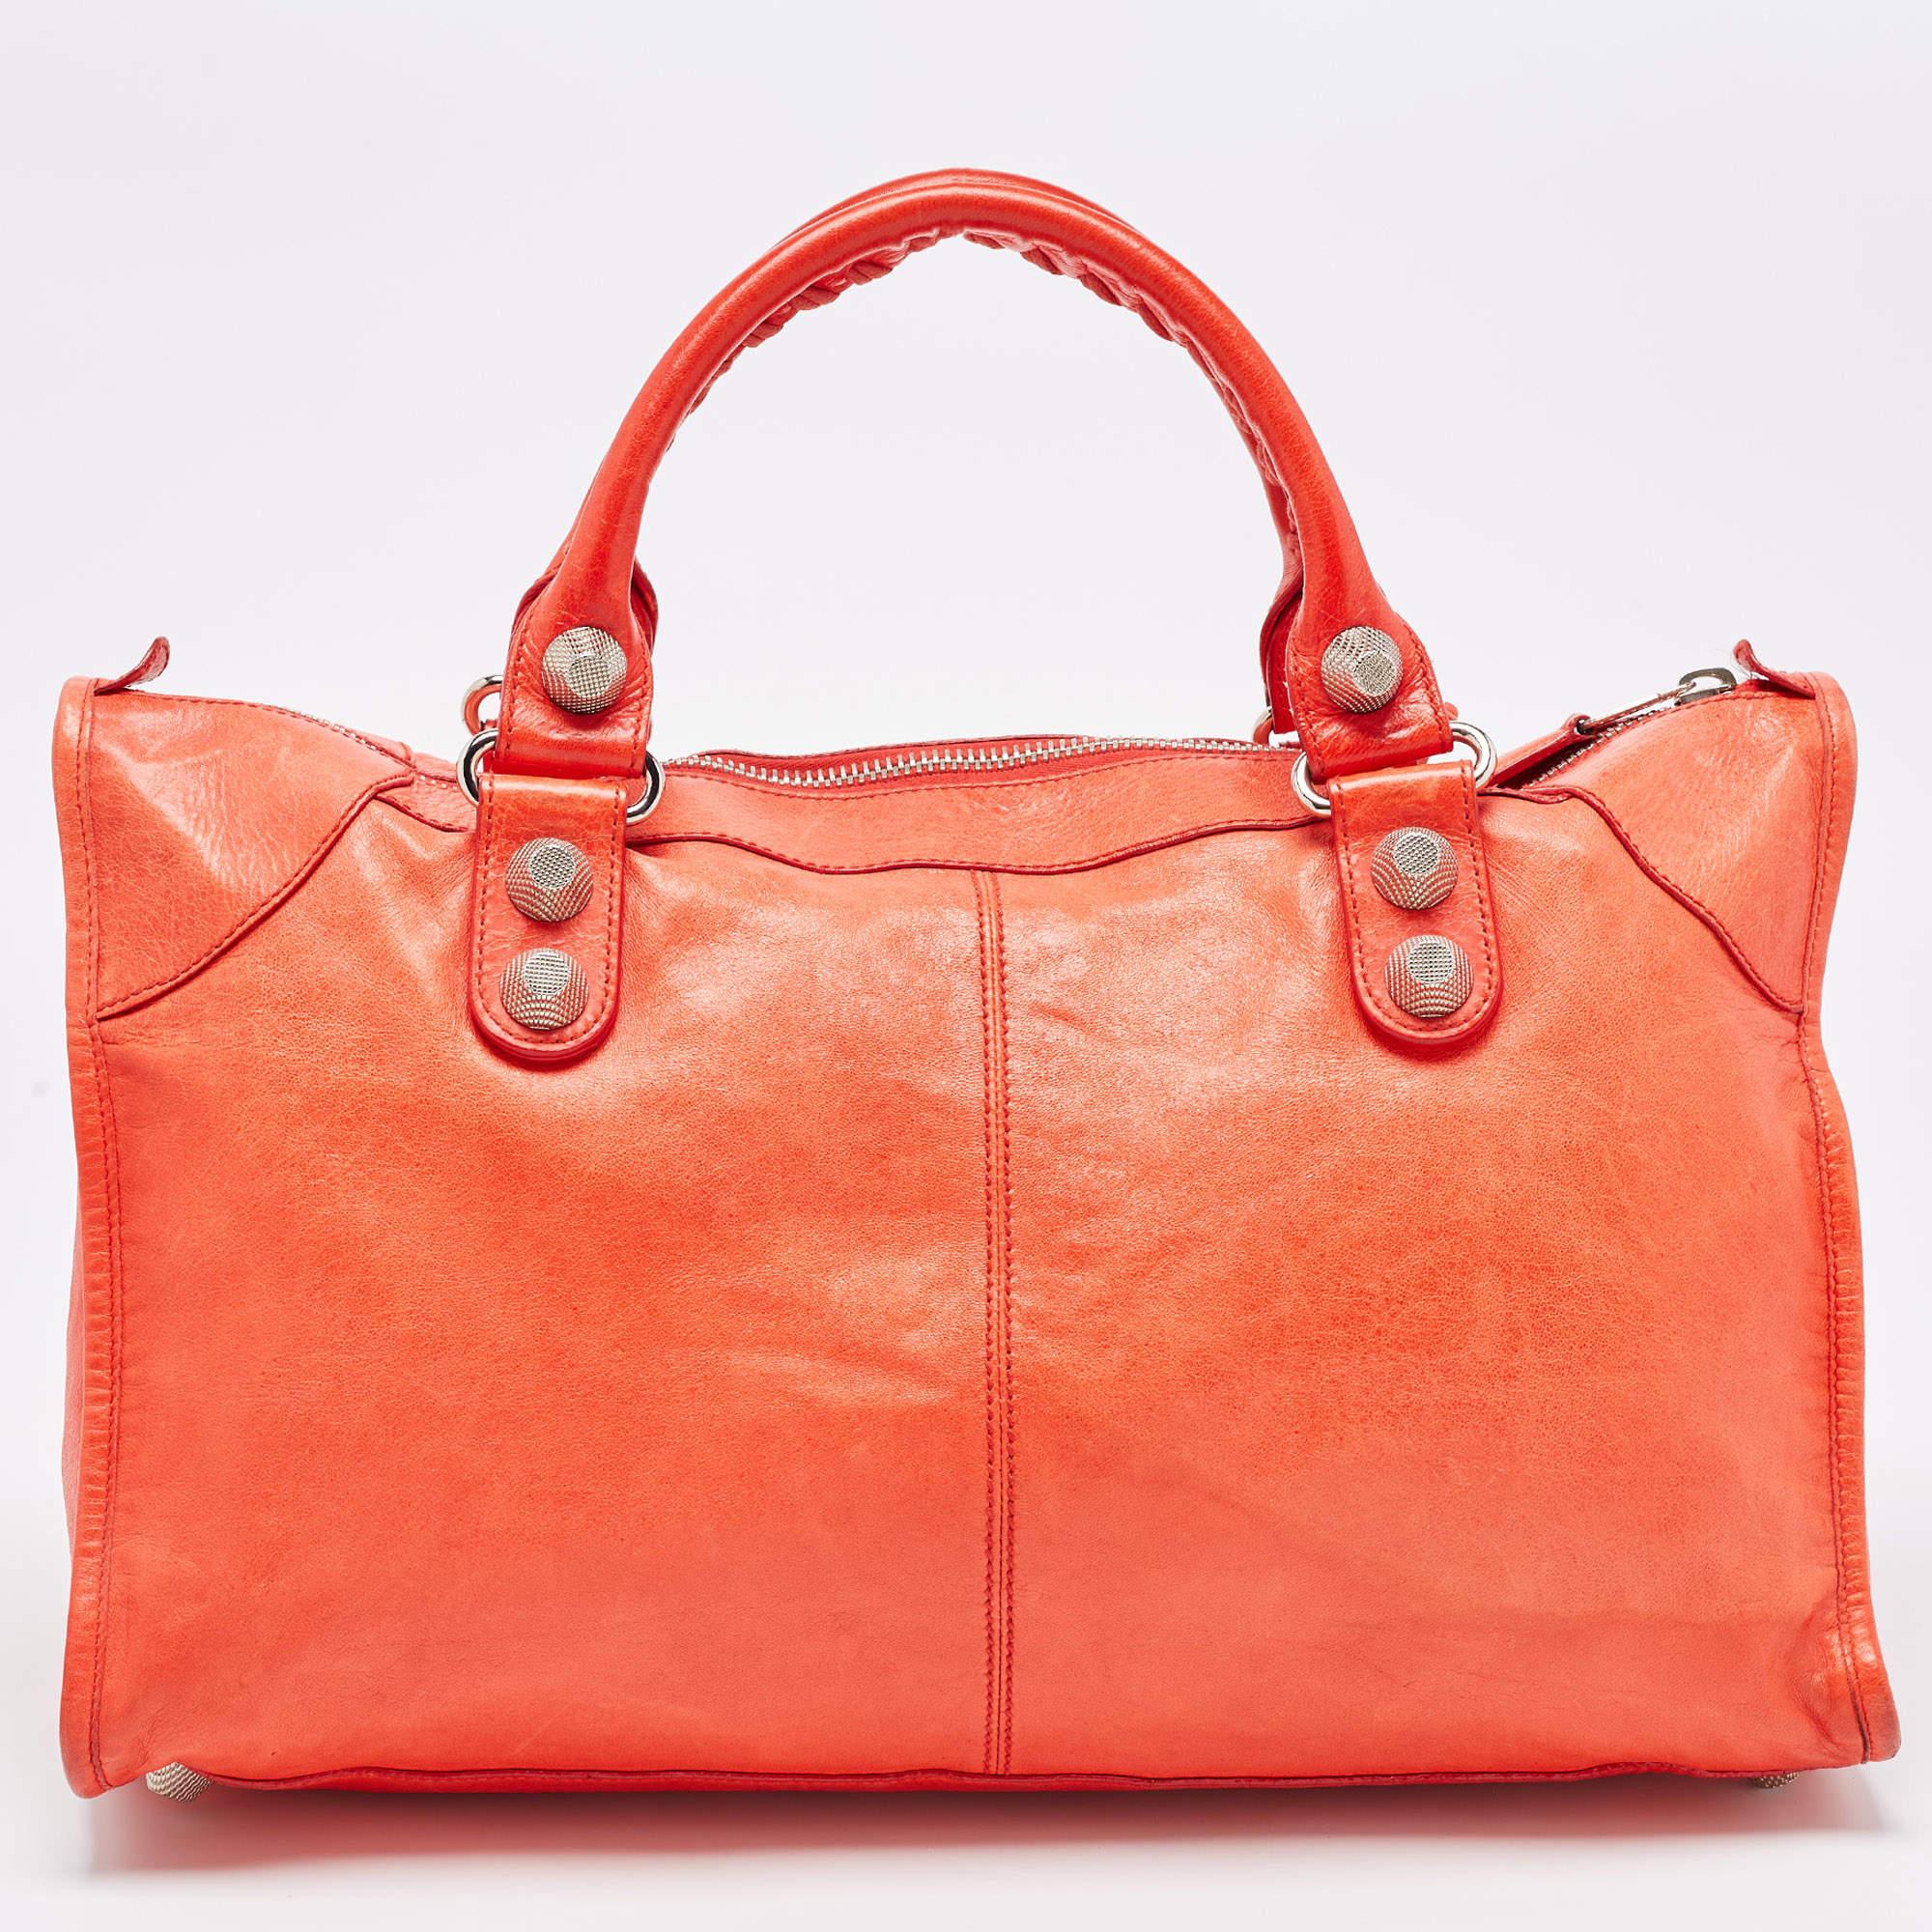 Revolutionary and visionary designs set Balenciaga apart from others, and this red creation testifies to it. The exterior of this tote is updated with chic and striking silver-tone accents. Crafted from leather, it is equipped with a front zipper